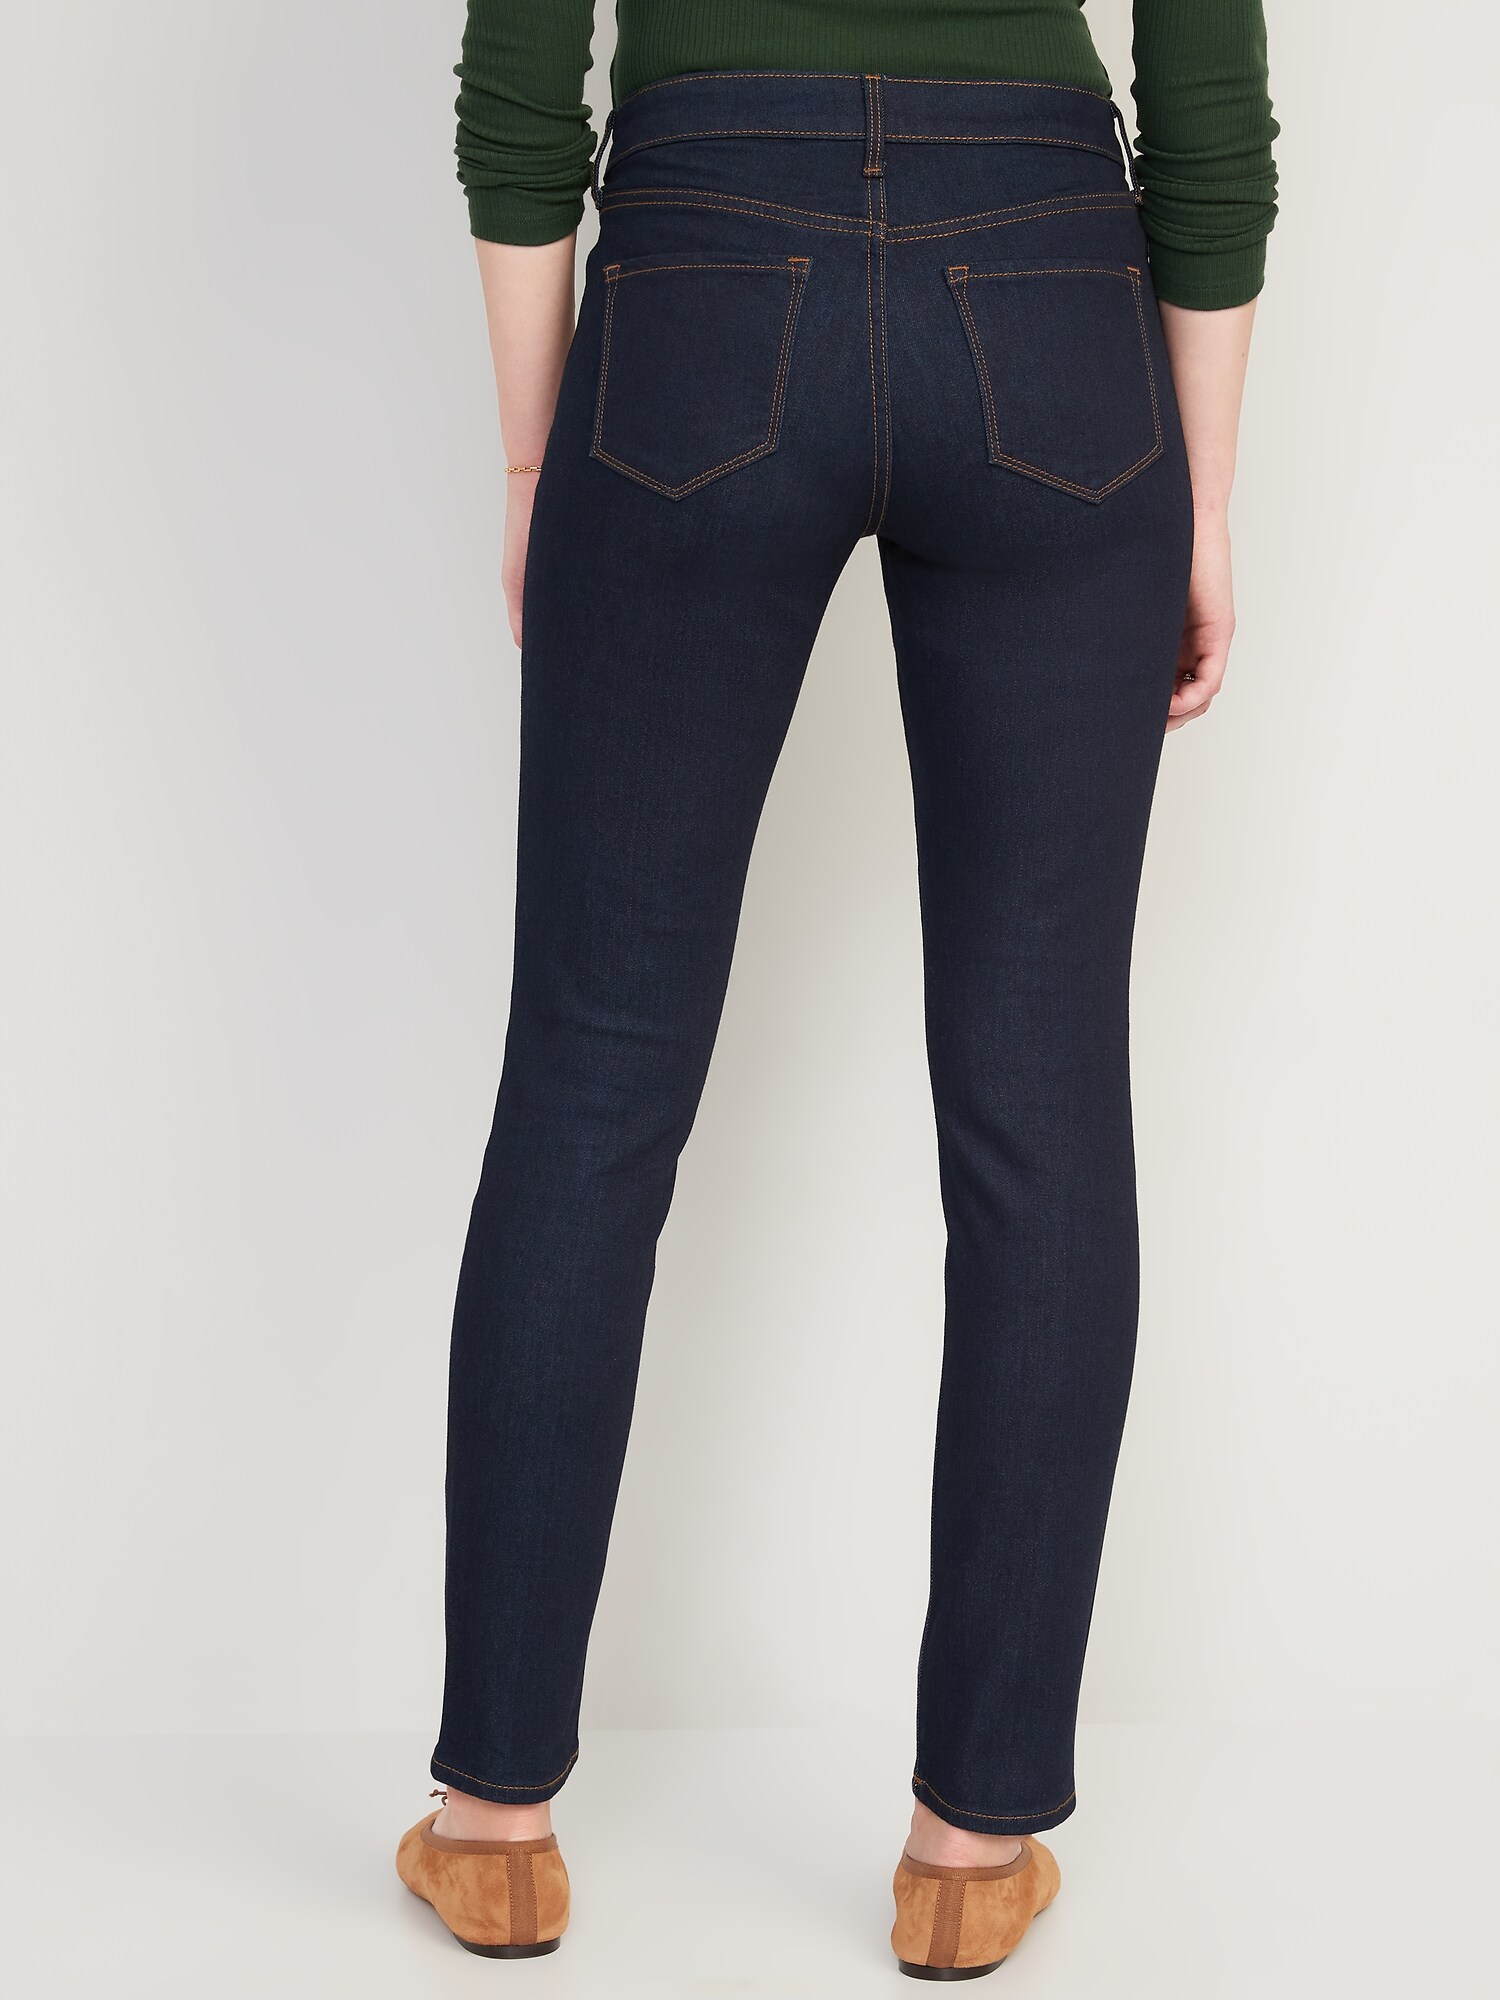 Mid-Rise Power Slim Straight Jeans | Old Navy